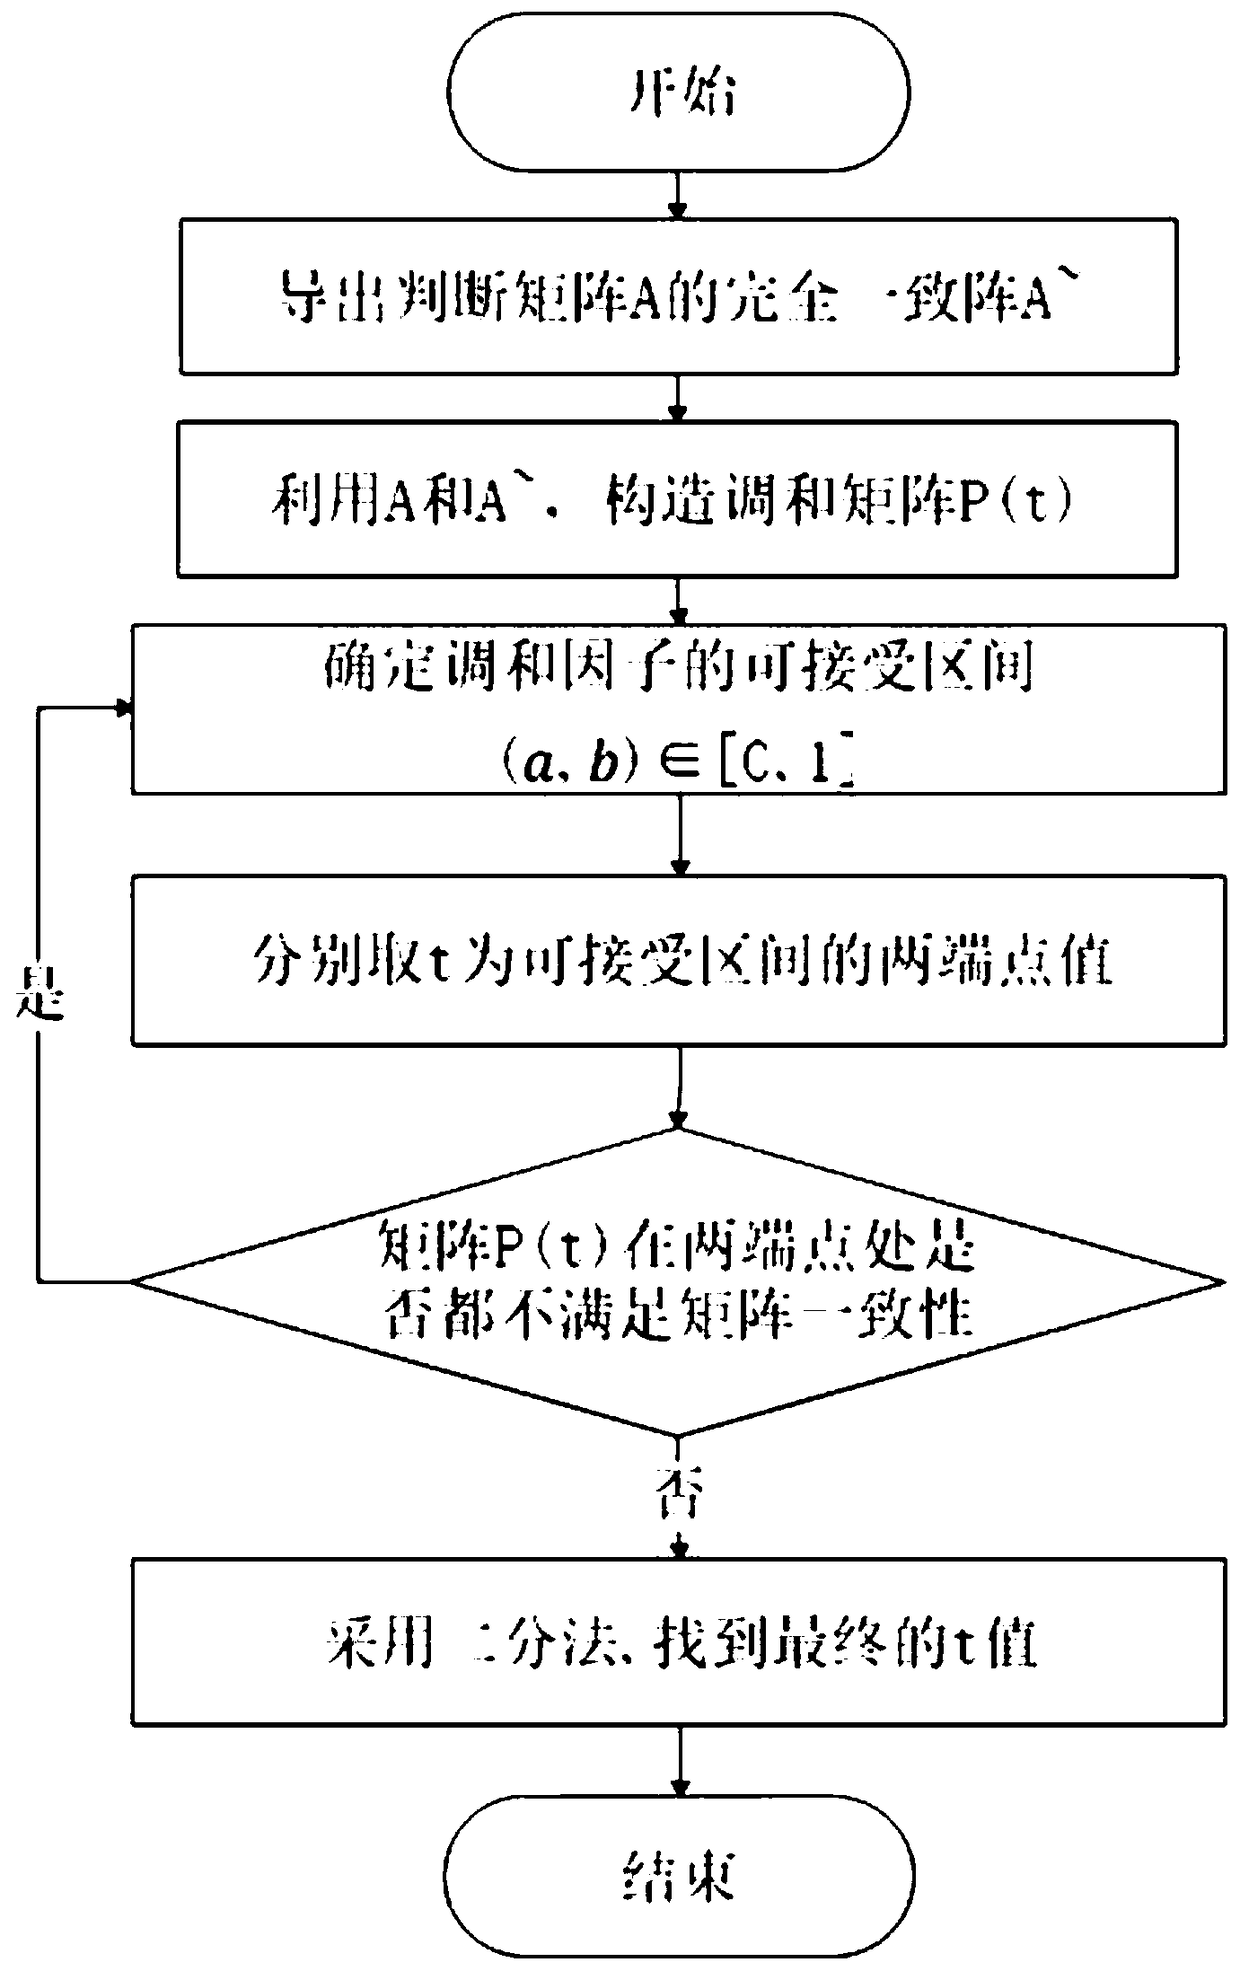 Automatic bid evaluation method used for building material purchasing